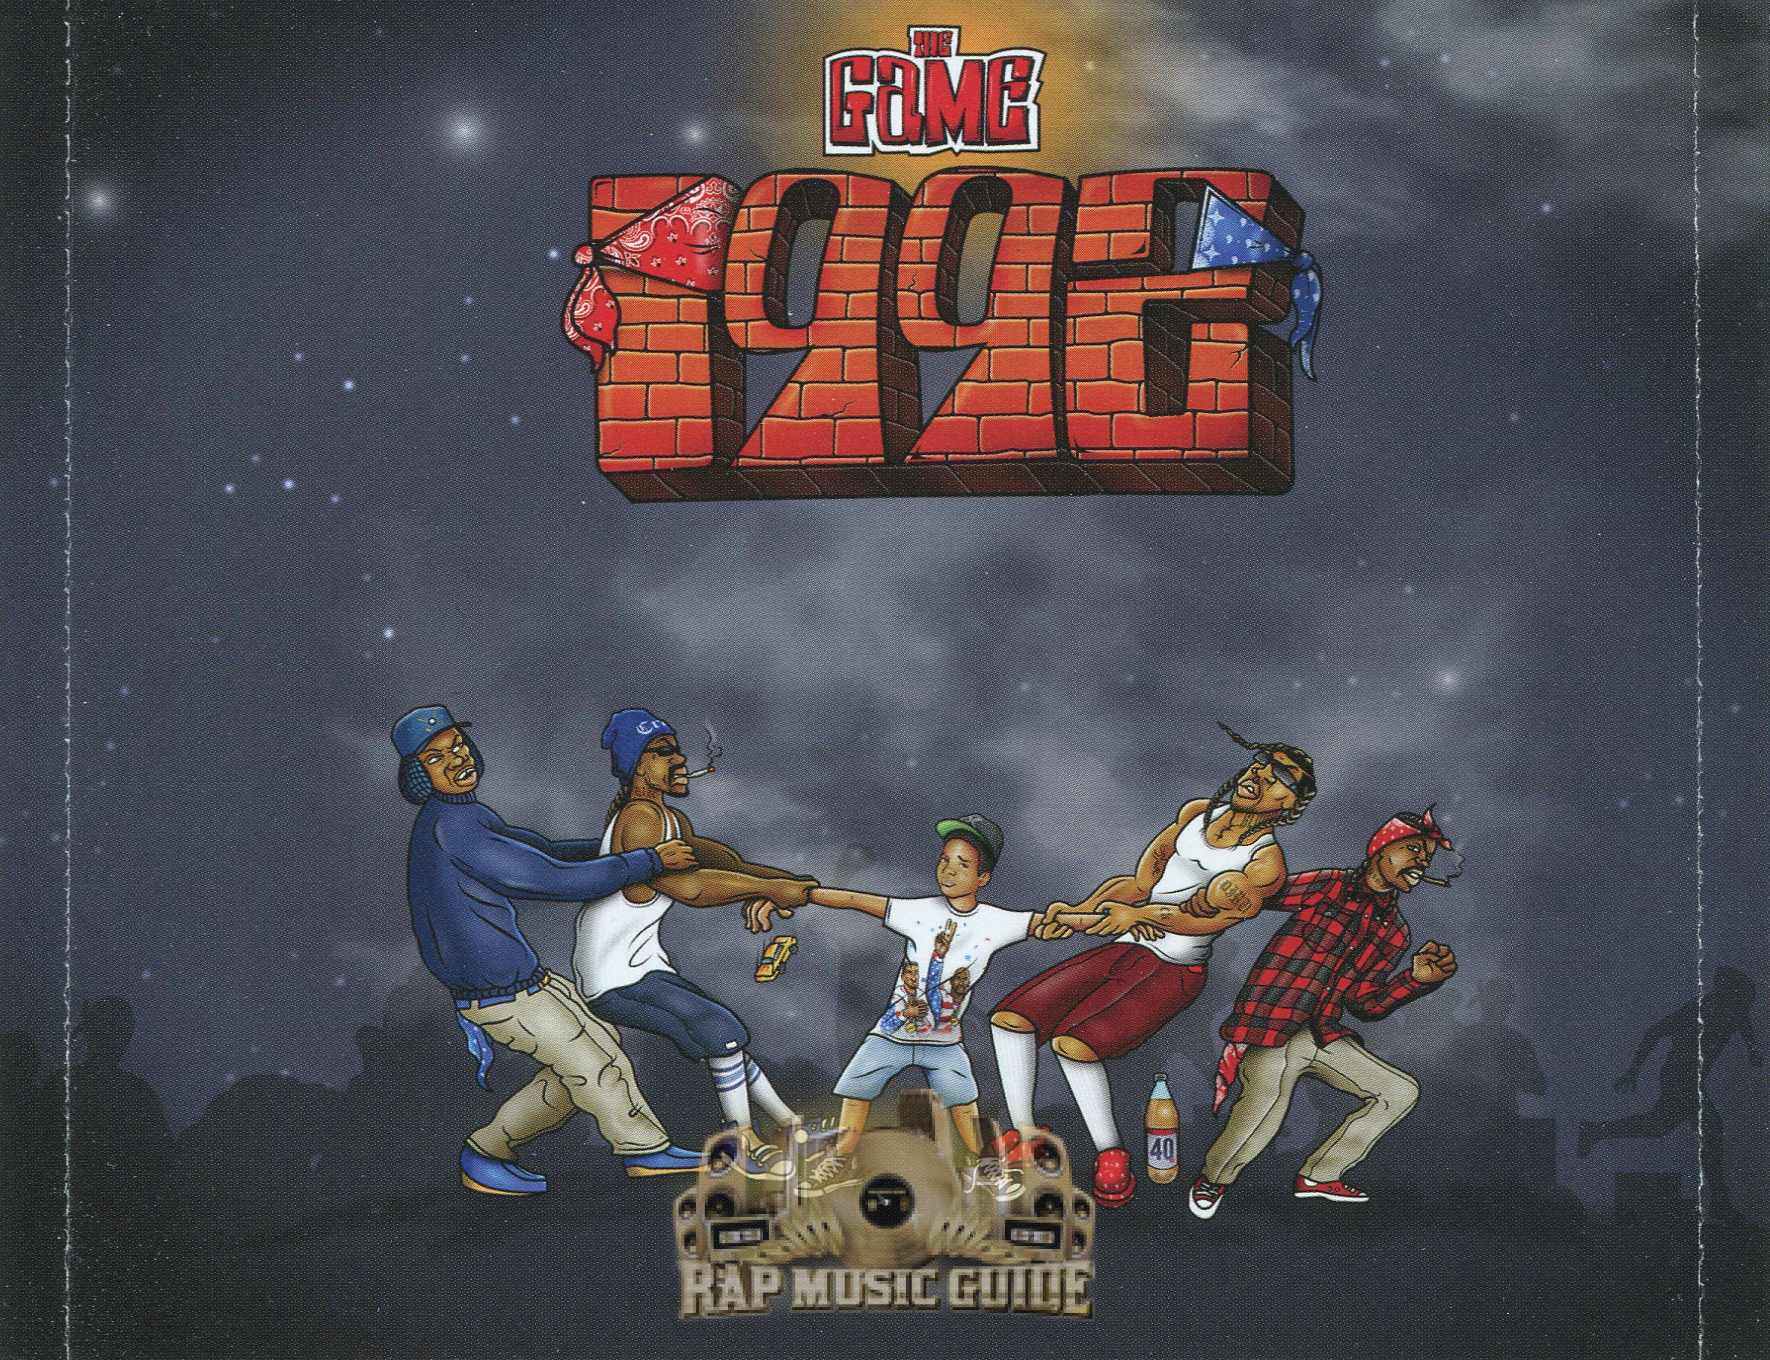 The Game - 1992: CD | Rap Music Guide